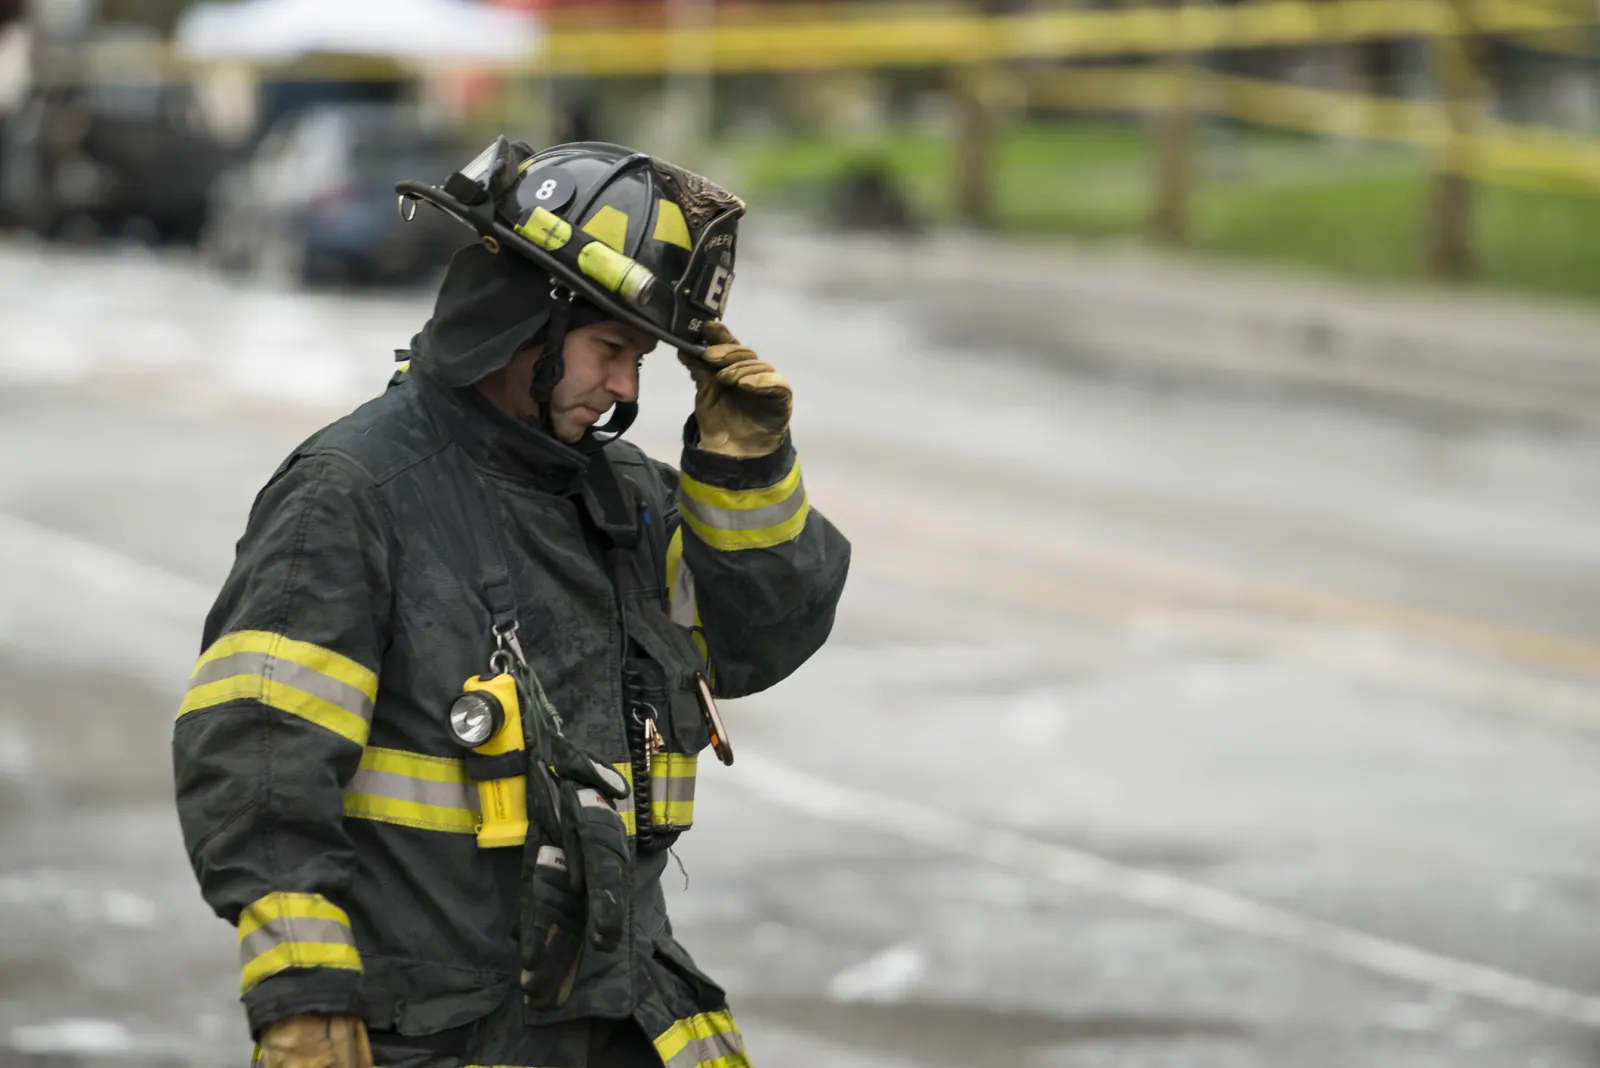 A fireman walks through an accident scene on the side of a roadway.